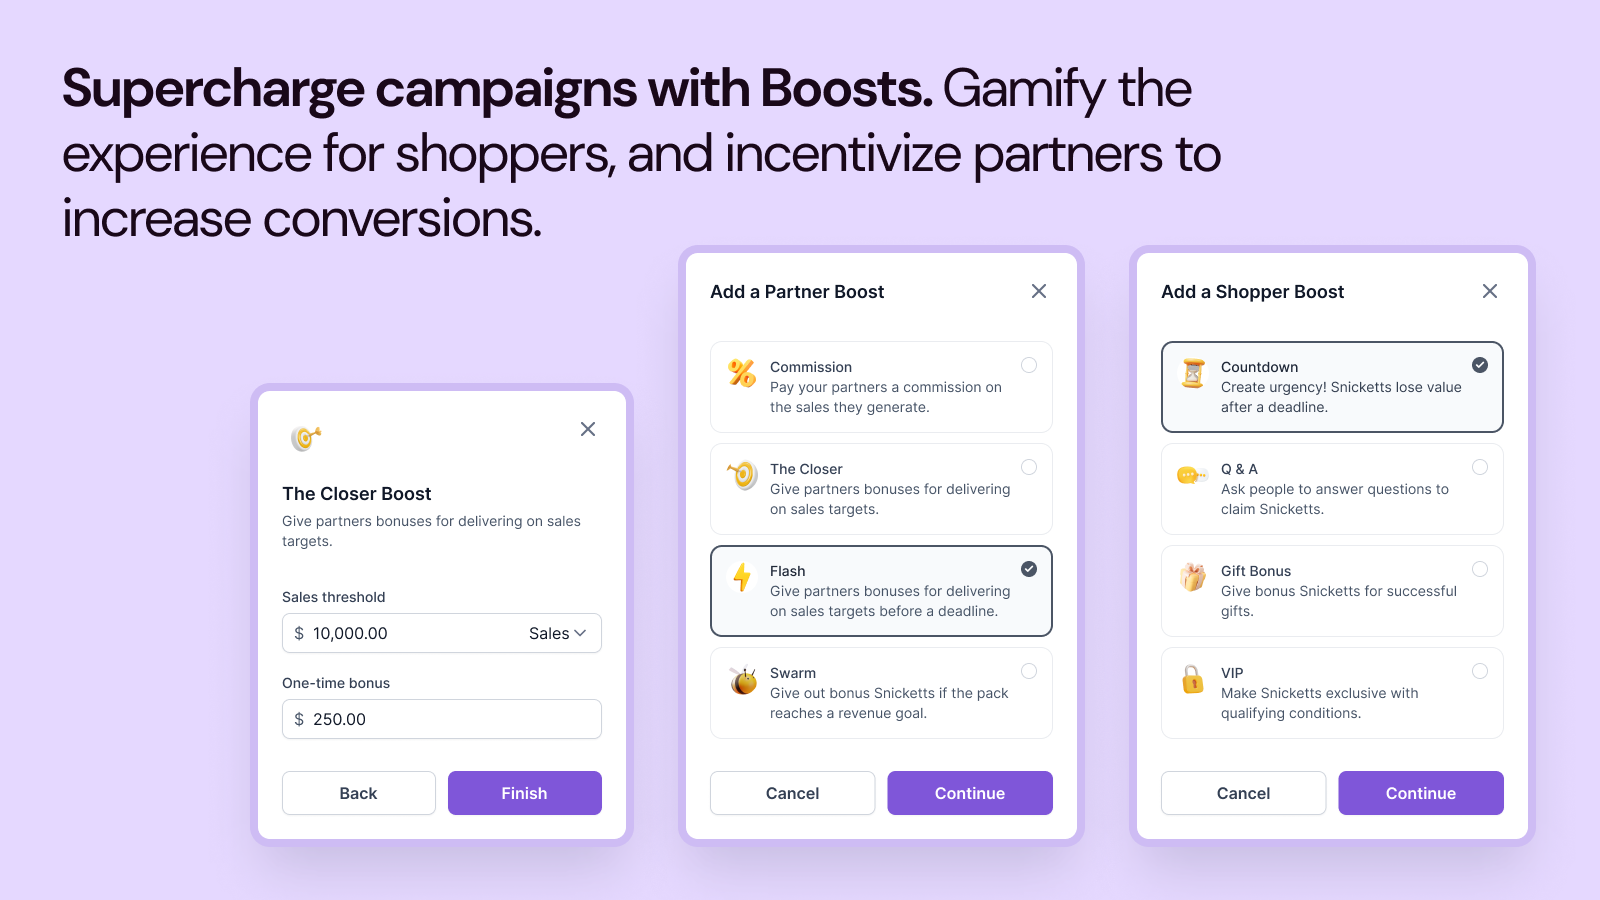 Supercharge campaigns with Boosts